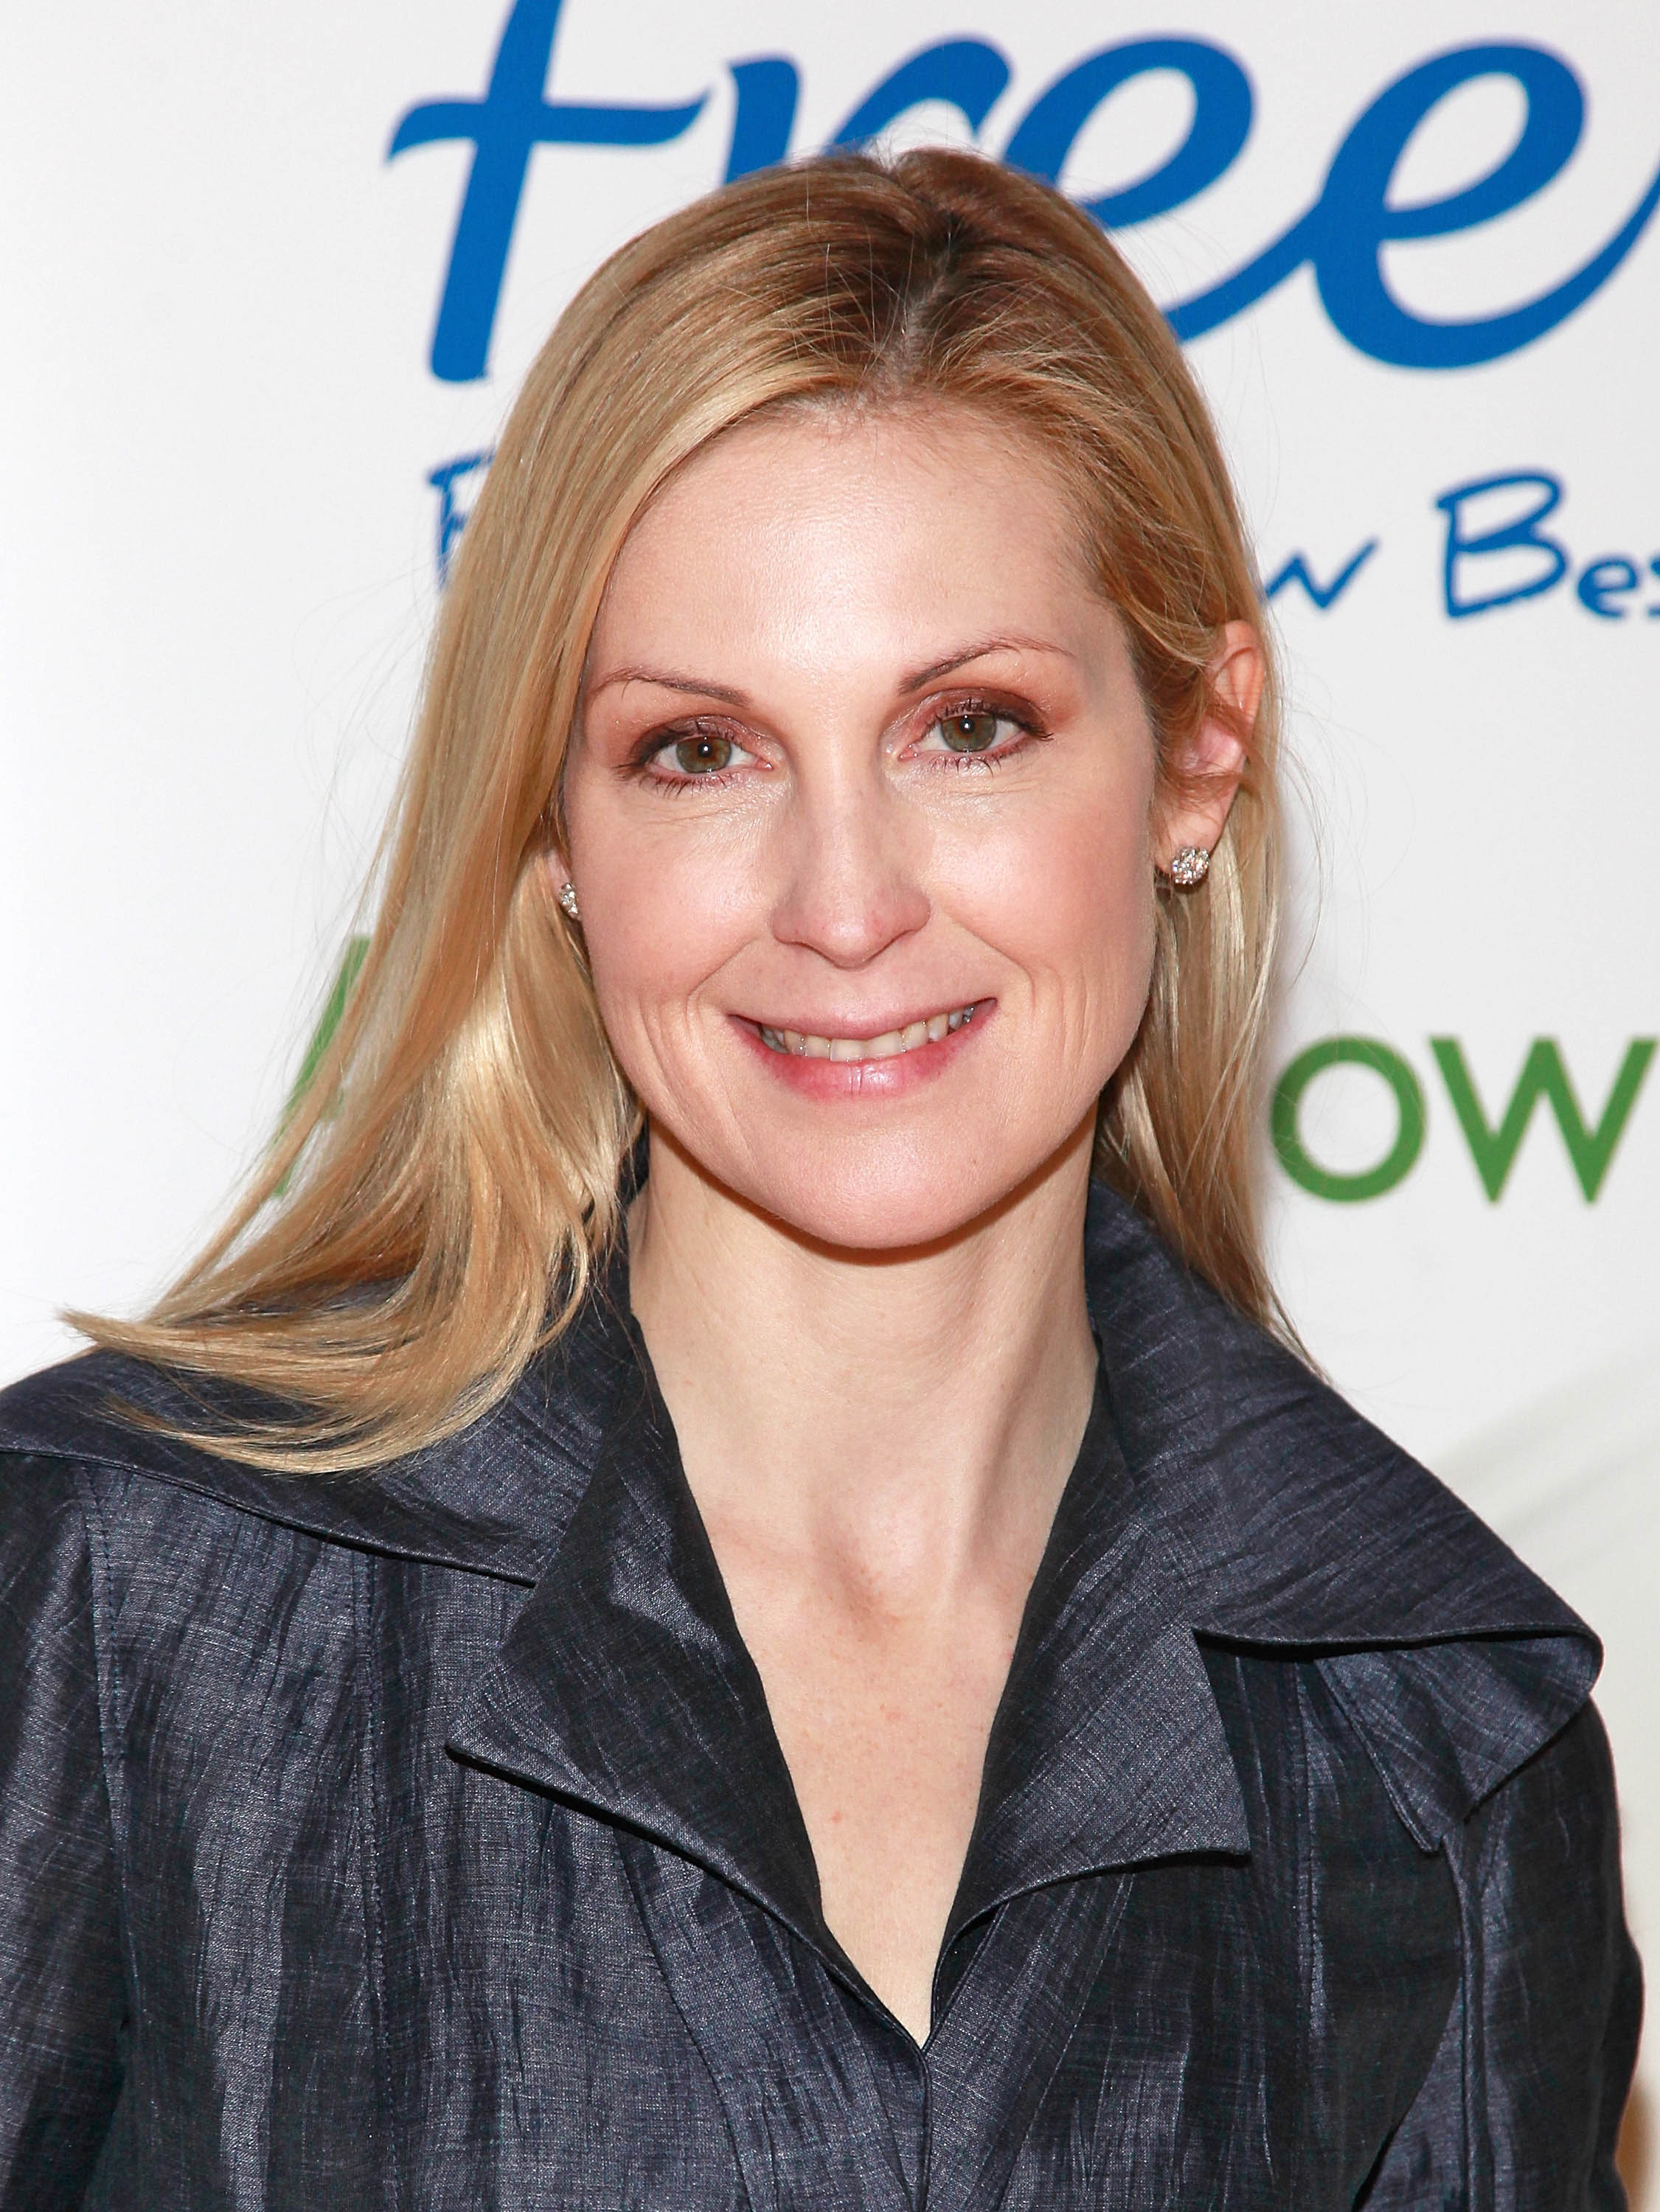 Kelly Rutherford photo #471722.